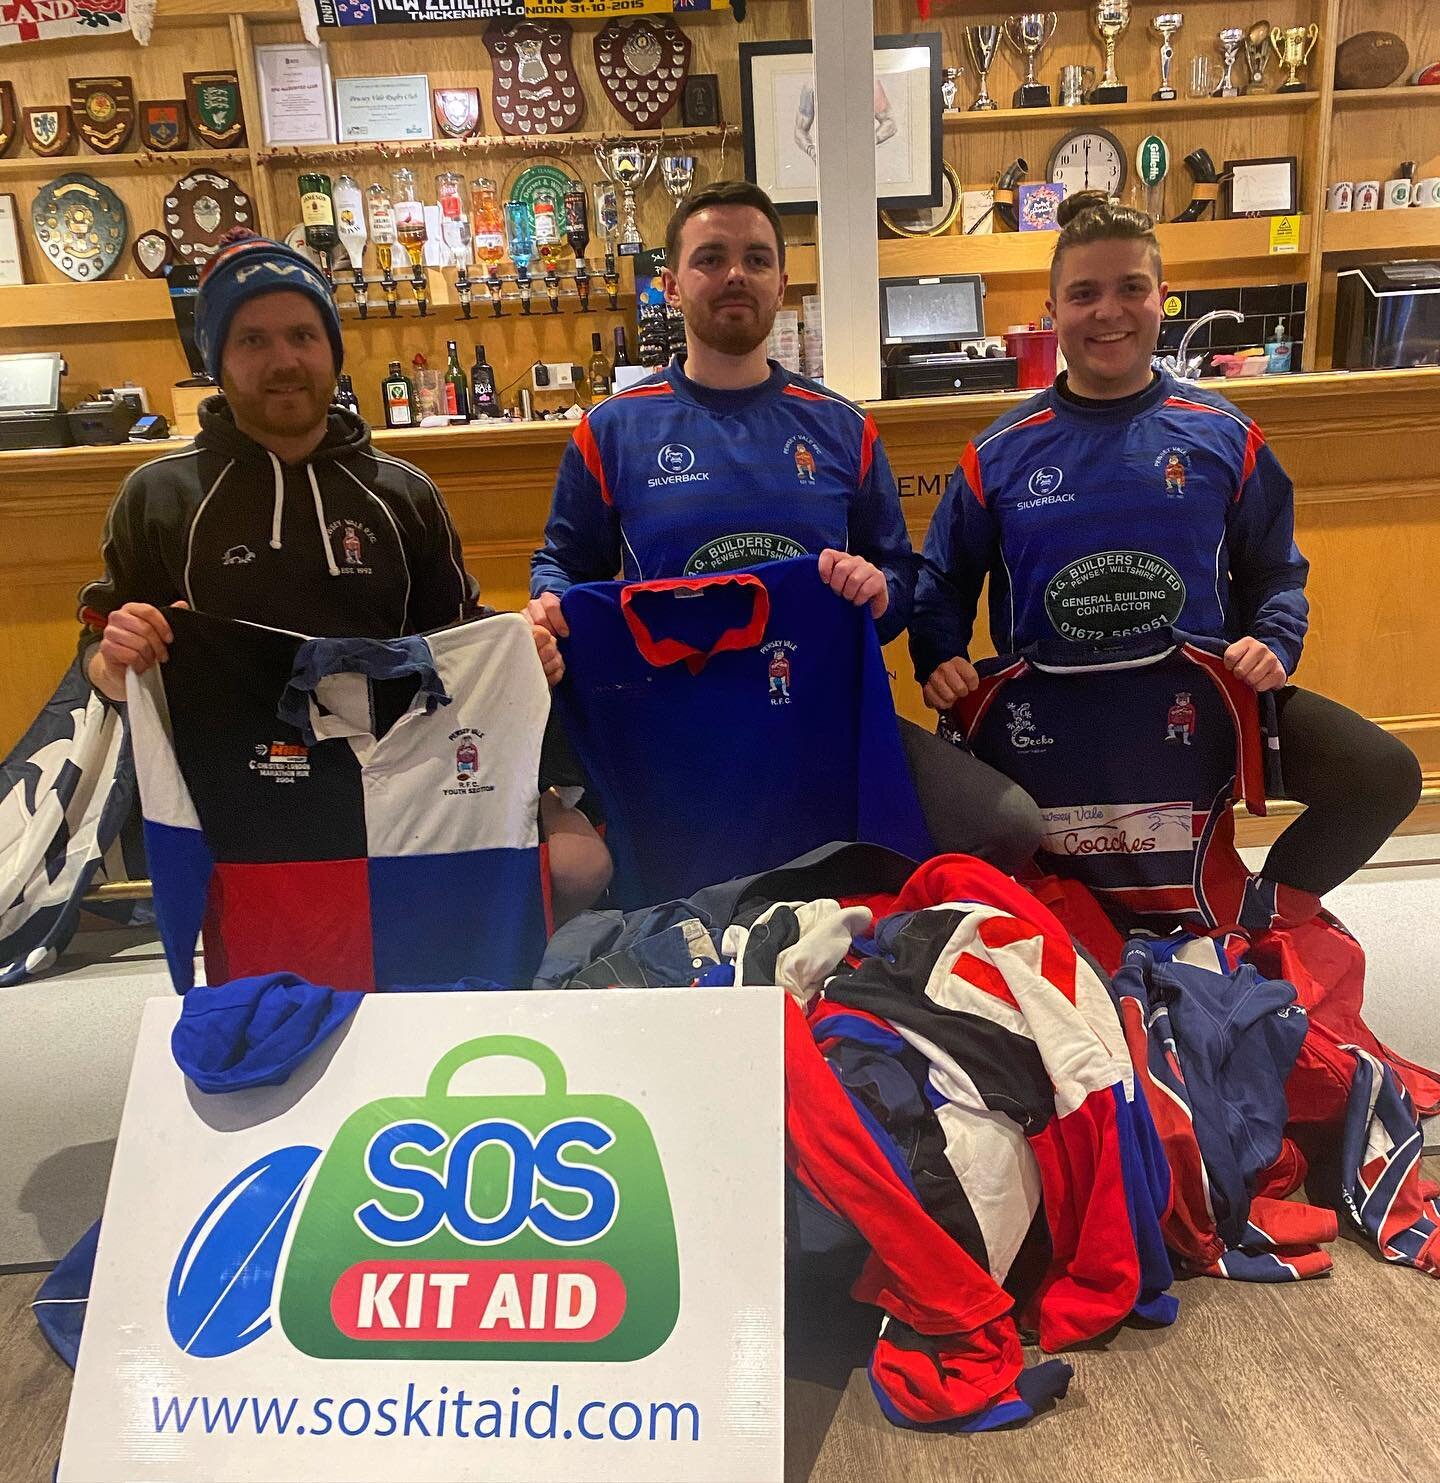 Really proud to have donated lots of old kit to SOS kit aid. 

Richard came and collected Pewsey Vale kits of years gone by last week. It was great to meet Richard and hear about where the kit will go. 

If anyone has any sports kit they no longer ne